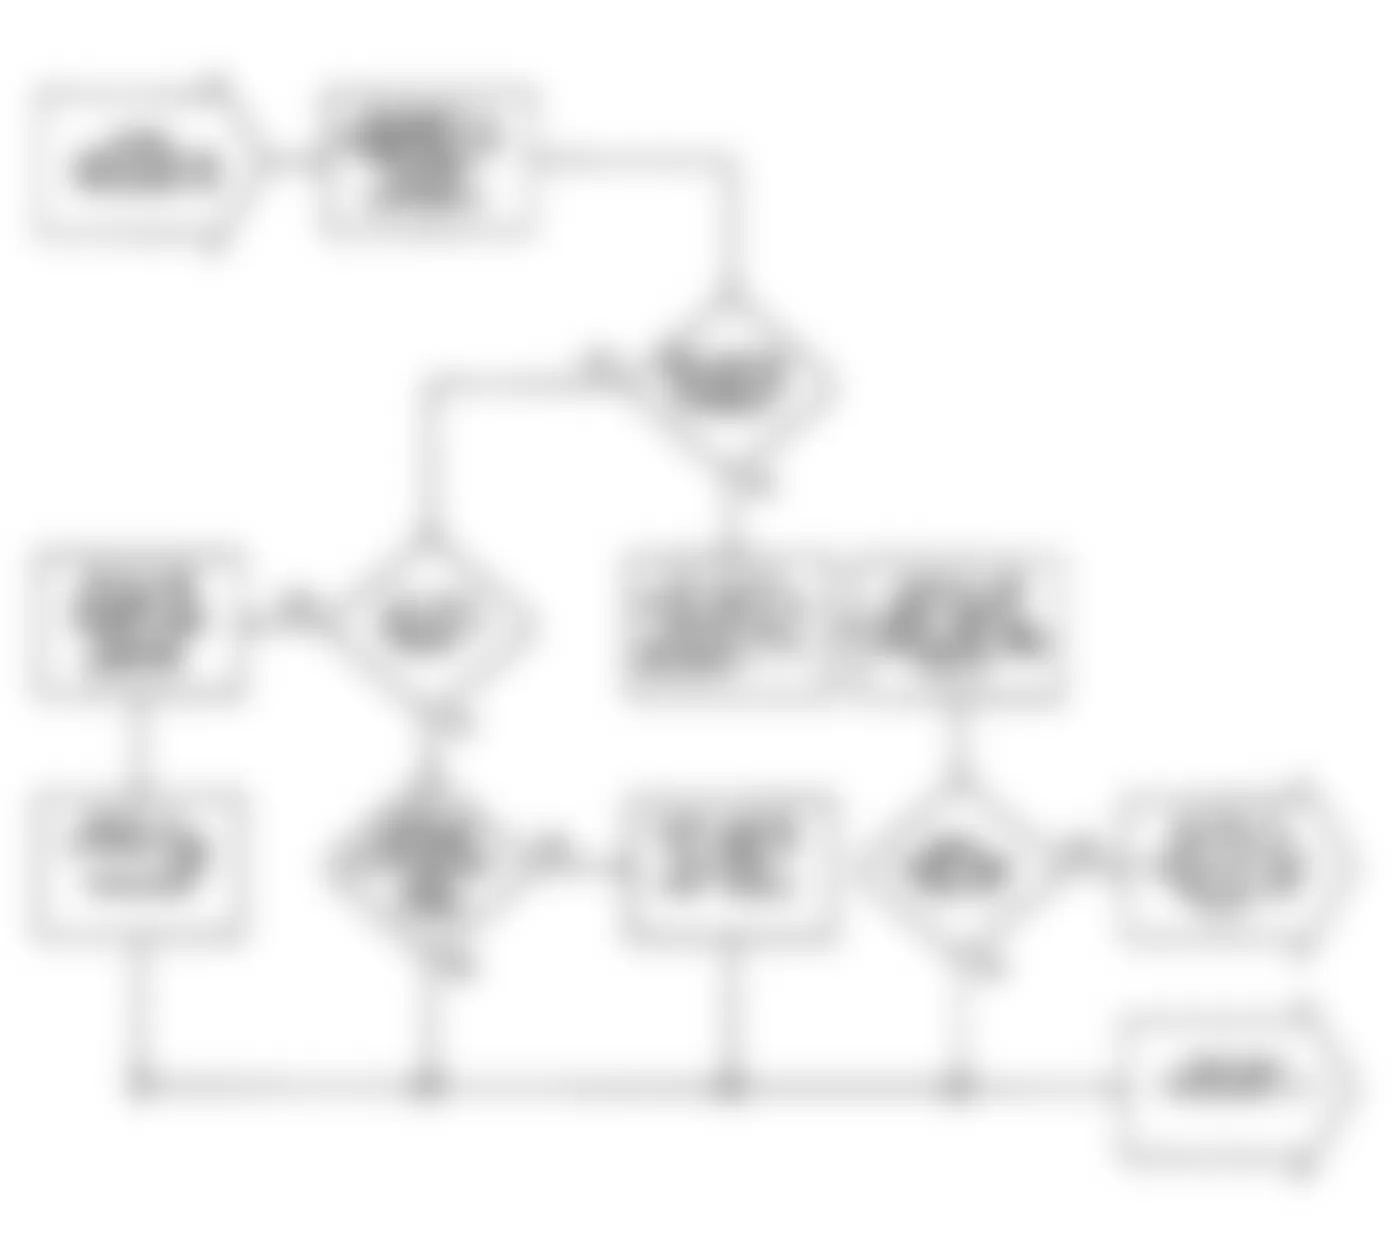 Chrysler LeBaron GTC 1990 - Component Locations -  VER-3: Flow Chart (1 of 2)